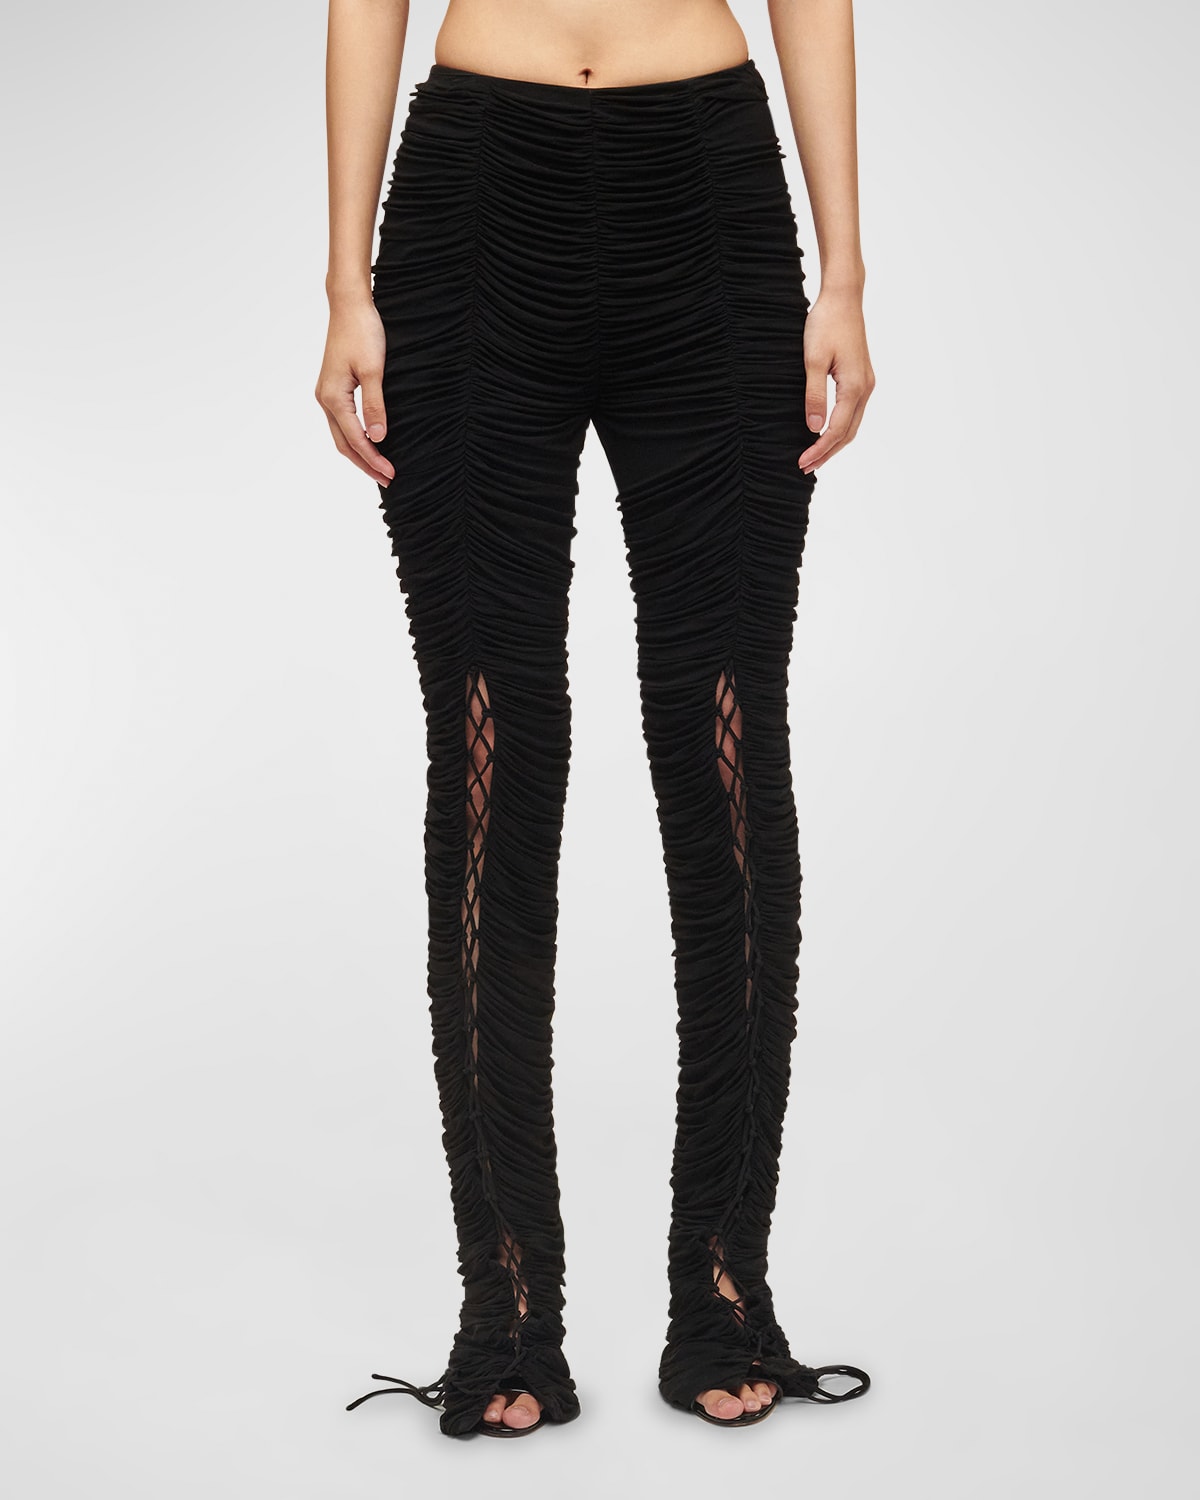 INTERIOR BEA RUCHED LACE-UP SKINNY-LEG PANTS